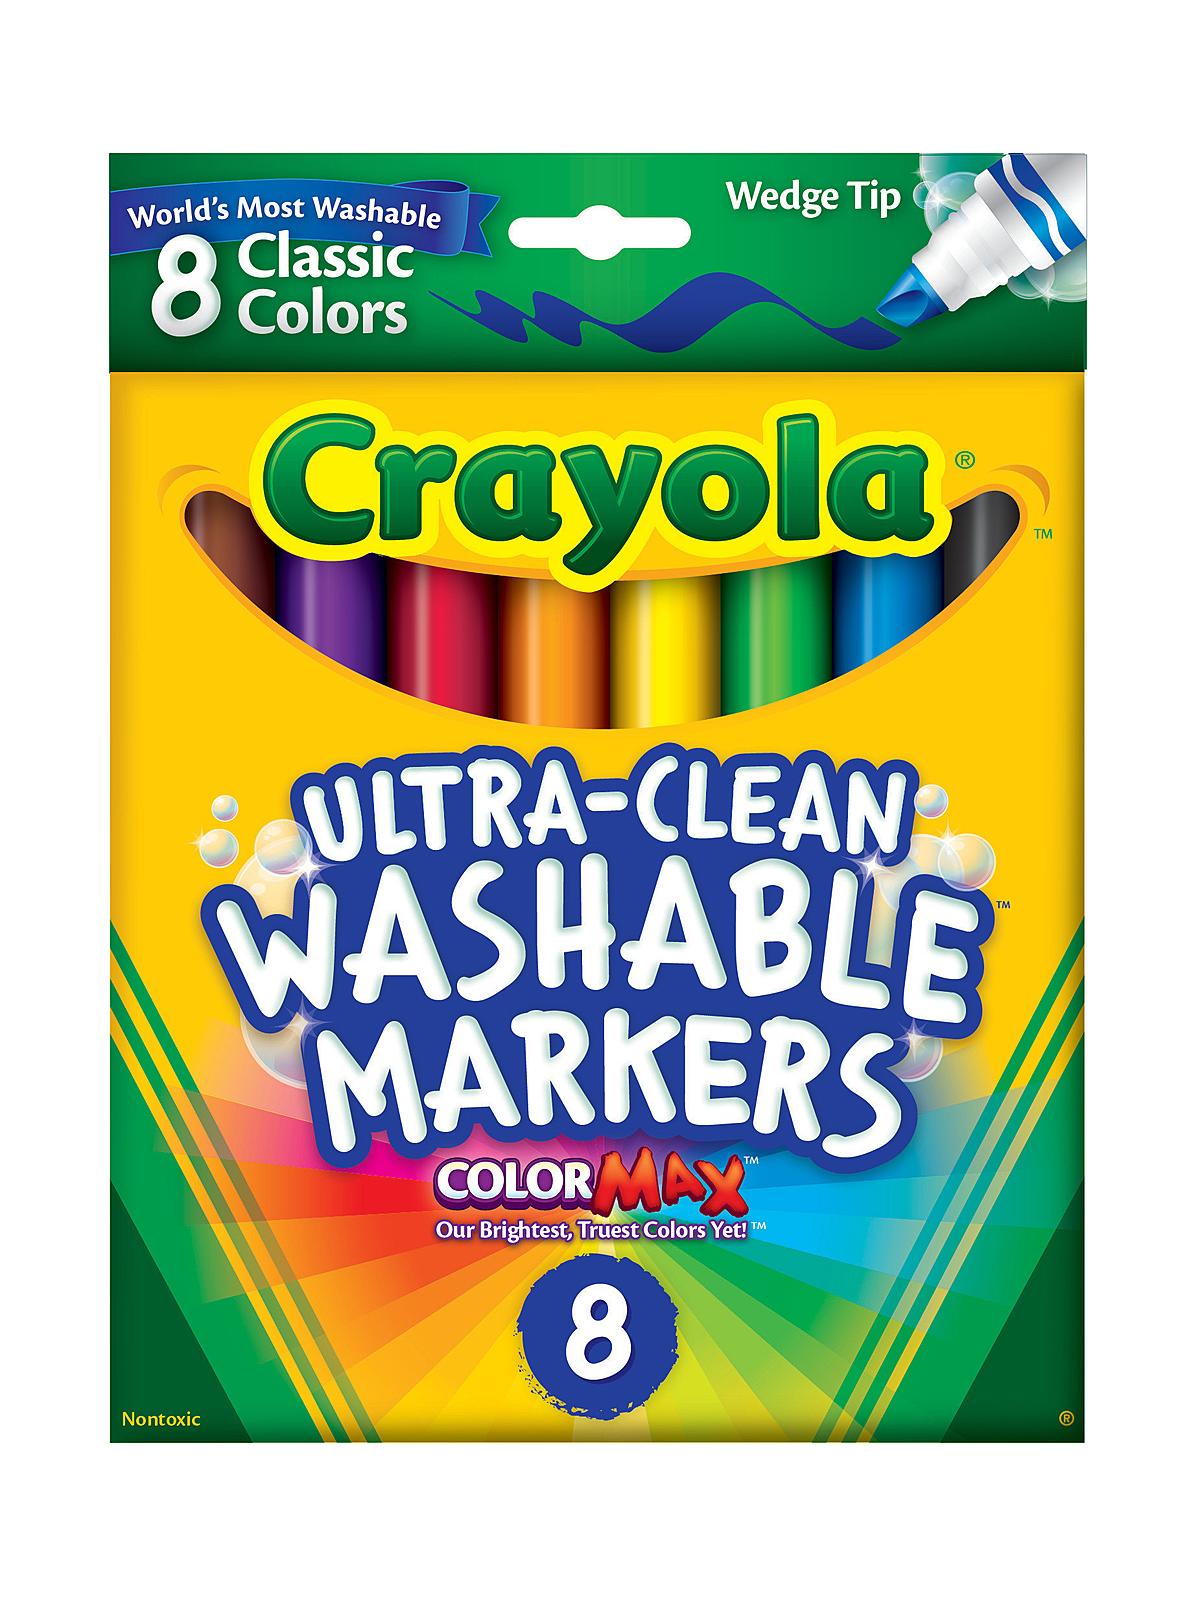 Classic Color Ultra-clean Washable Markers Wedge Tip Pack Of 8